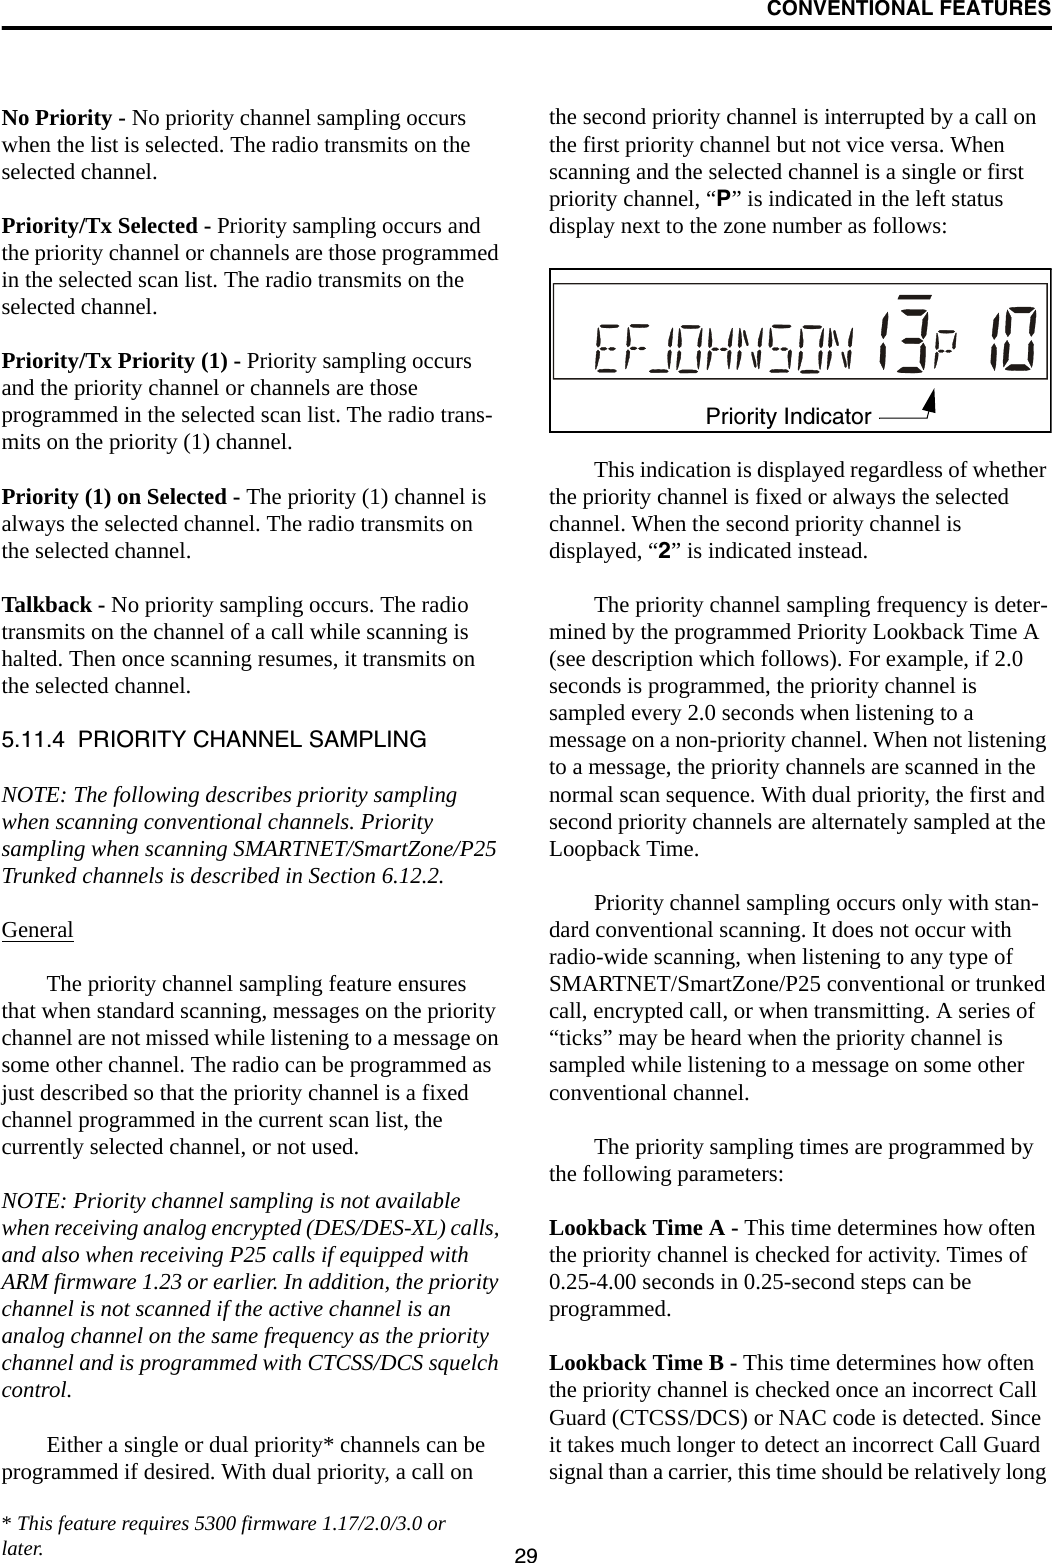 CONVENTIONAL FEATURES29No Priority - No priority channel sampling occurs when the list is selected. The radio transmits on the selected channel.Priority/Tx Selected - Priority sampling occurs and the priority channel or channels are those programmed in the selected scan list. The radio transmits on the selected channel.Priority/Tx Priority (1) - Priority sampling occurs and the priority channel or channels are those programmed in the selected scan list. The radio trans-mits on the priority (1) channel.Priority (1) on Selected - The priority (1) channel is always the selected channel. The radio transmits on the selected channel. Talkback - No priority sampling occurs. The radio transmits on the channel of a call while scanning is halted. Then once scanning resumes, it transmits on the selected channel.5.11.4  PRIORITY CHANNEL SAMPLINGNOTE: The following describes priority sampling when scanning conventional channels. Priority sampling when scanning SMARTNET/SmartZone/P25 Trunked channels is described in Section 6.12.2.GeneralThe priority channel sampling feature ensures that when standard scanning, messages on the priority channel are not missed while listening to a message on some other channel. The radio can be programmed as just described so that the priority channel is a fixed channel programmed in the current scan list, the currently selected channel, or not used.NOTE: Priority channel sampling is not available when receiving analog encrypted (DES/DES-XL) calls, and also when receiving P25 calls if equipped with ARM firmware 1.23 or earlier. In addition, the priority channel is not scanned if the active channel is an analog channel on the same frequency as the priority channel and is programmed with CTCSS/DCS squelch control.Either a single or dual priority* channels can be programmed if desired. With dual priority, a call on the second priority channel is interrupted by a call on the first priority channel but not vice versa. When scanning and the selected channel is a single or first priority channel, “P” is indicated in the left status display next to the zone number as follows:This indication is displayed regardless of whether the priority channel is fixed or always the selected channel. When the second priority channel is displayed, “2” is indicated instead. The priority channel sampling frequency is deter-mined by the programmed Priority Lookback Time A (see description which follows). For example, if 2.0 seconds is programmed, the priority channel is sampled every 2.0 seconds when listening to a message on a non-priority channel. When not listening to a message, the priority channels are scanned in the normal scan sequence. With dual priority, the first and second priority channels are alternately sampled at the Loopback Time.Priority channel sampling occurs only with stan-dard conventional scanning. It does not occur with radio-wide scanning, when listening to any type of SMARTNET/SmartZone/P25 conventional or trunked call, encrypted call, or when transmitting. A series of “ticks” may be heard when the priority channel is sampled while listening to a message on some other conventional channel. The priority sampling times are programmed by the following parameters:Lookback Time A - This time determines how often the priority channel is checked for activity. Times of 0.25-4.00 seconds in 0.25-second steps can be programmed.Lookback Time B - This time determines how often the priority channel is checked once an incorrect Call Guard (CTCSS/DCS) or NAC code is detected. Since it takes much longer to detect an incorrect Call Guard signal than a carrier, this time should be relatively long Priority Indicator* This feature requires 5300 firmware 1.17/2.0/3.0 or later.